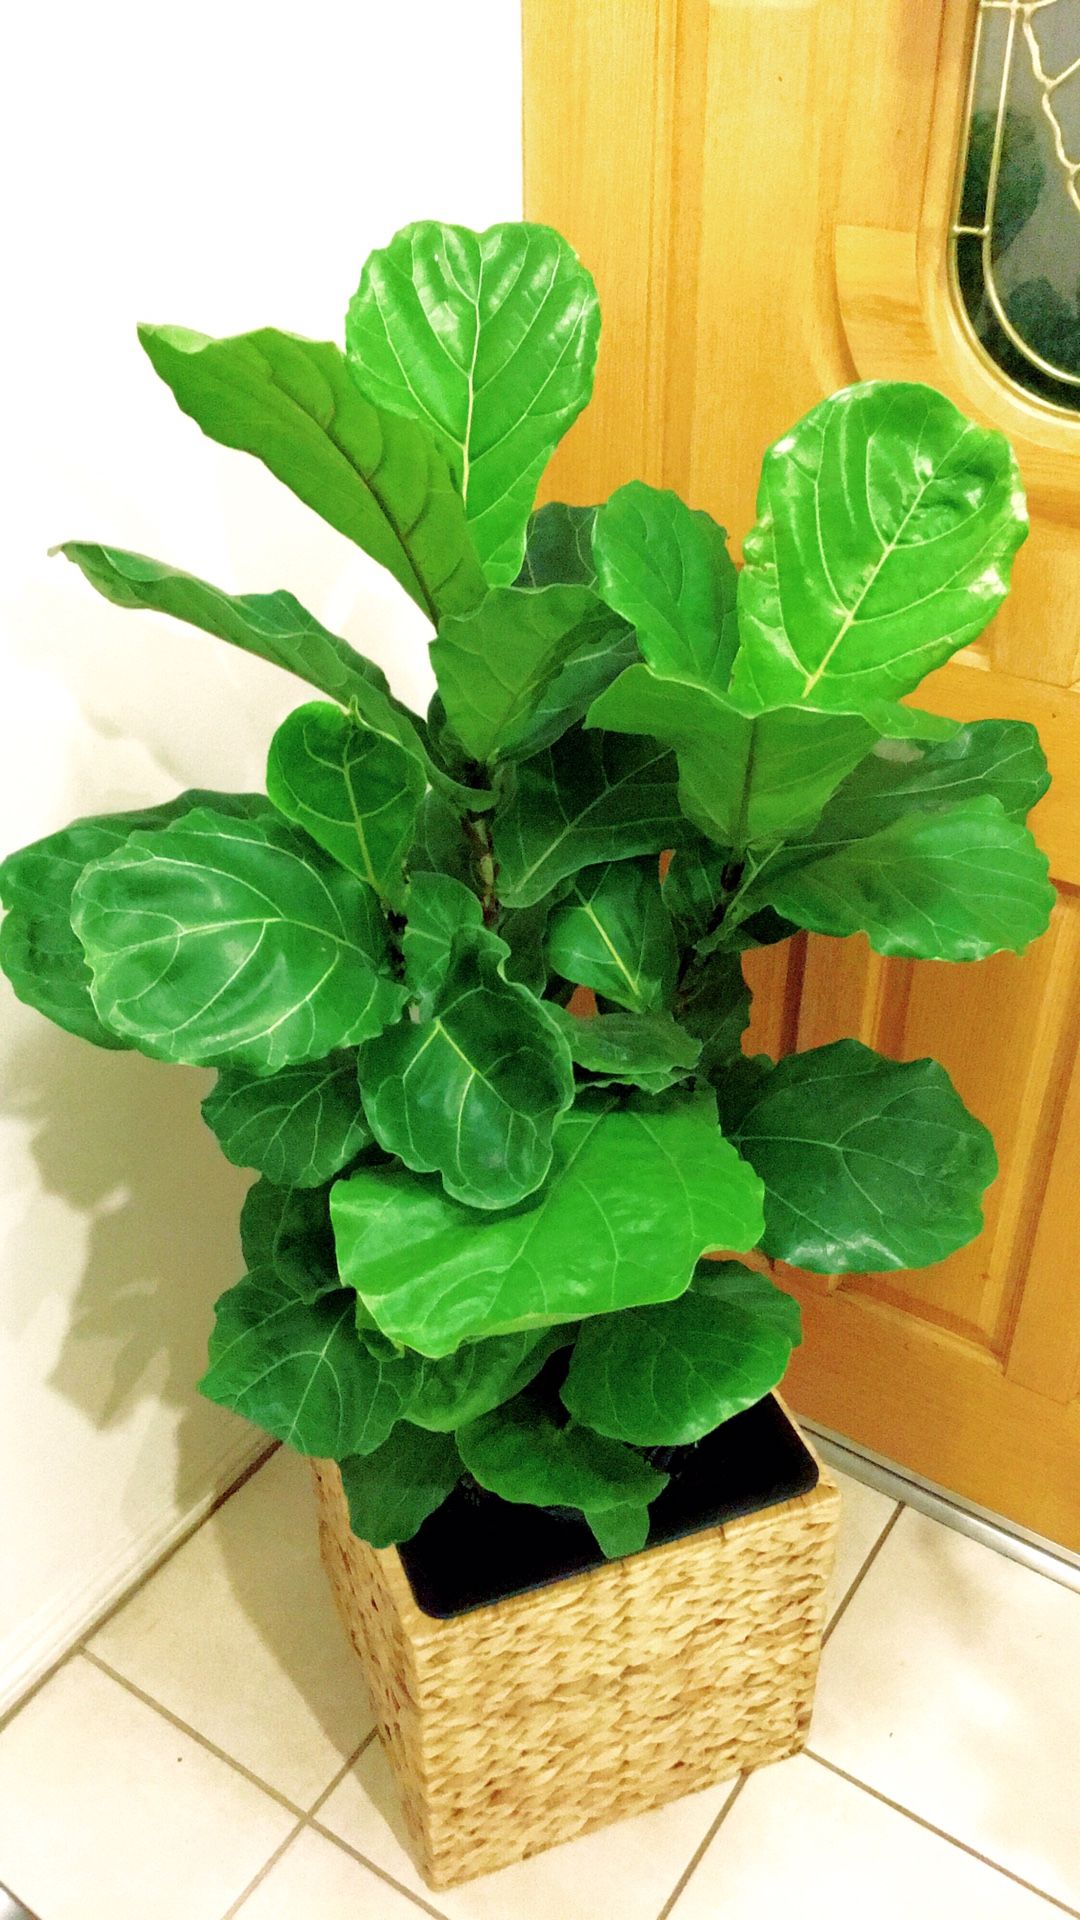 Big and Tall Fiddle Leaf Fig Plants - About 40” Tall - Plant Only - Planter Not Included